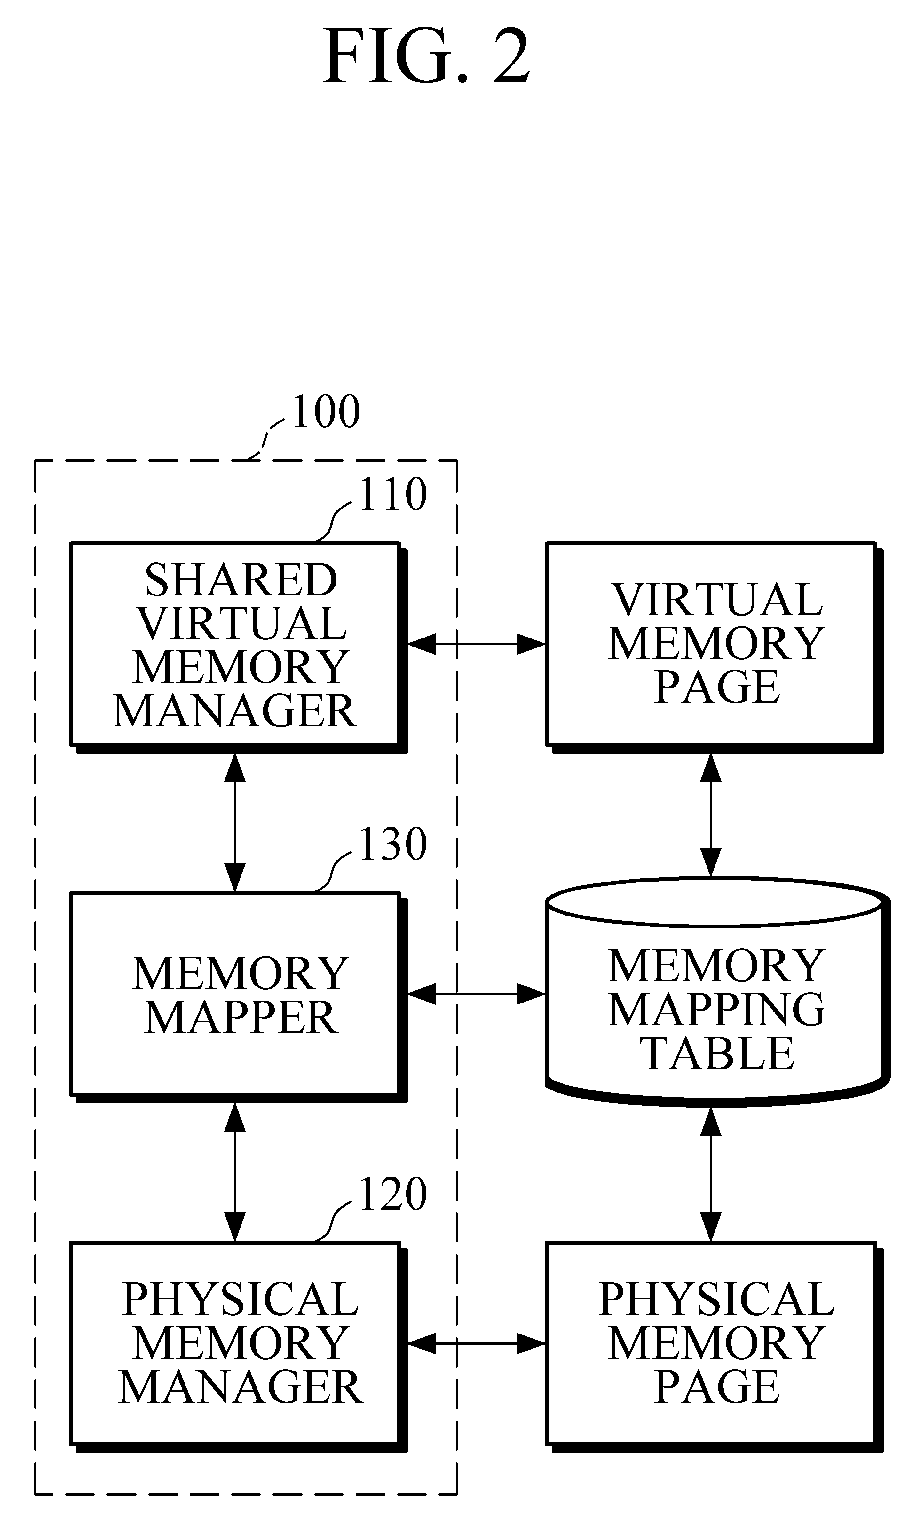 Shared virtual memory management apparatus for providing cache-coherence